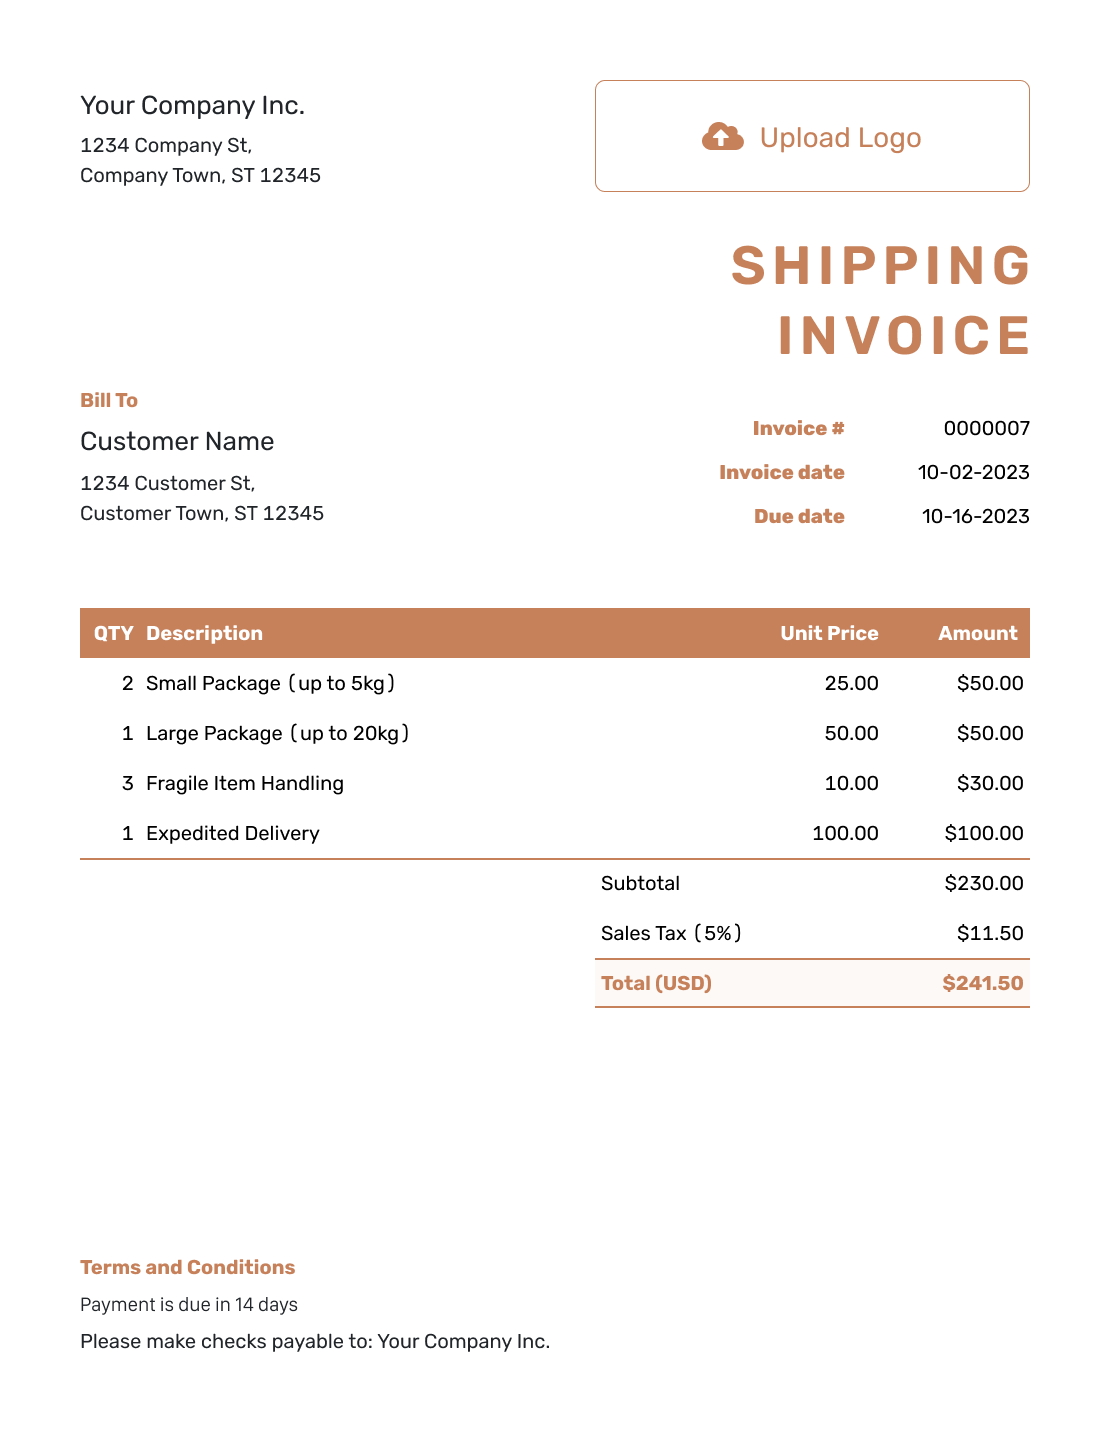 Standard Shipping Invoice Template